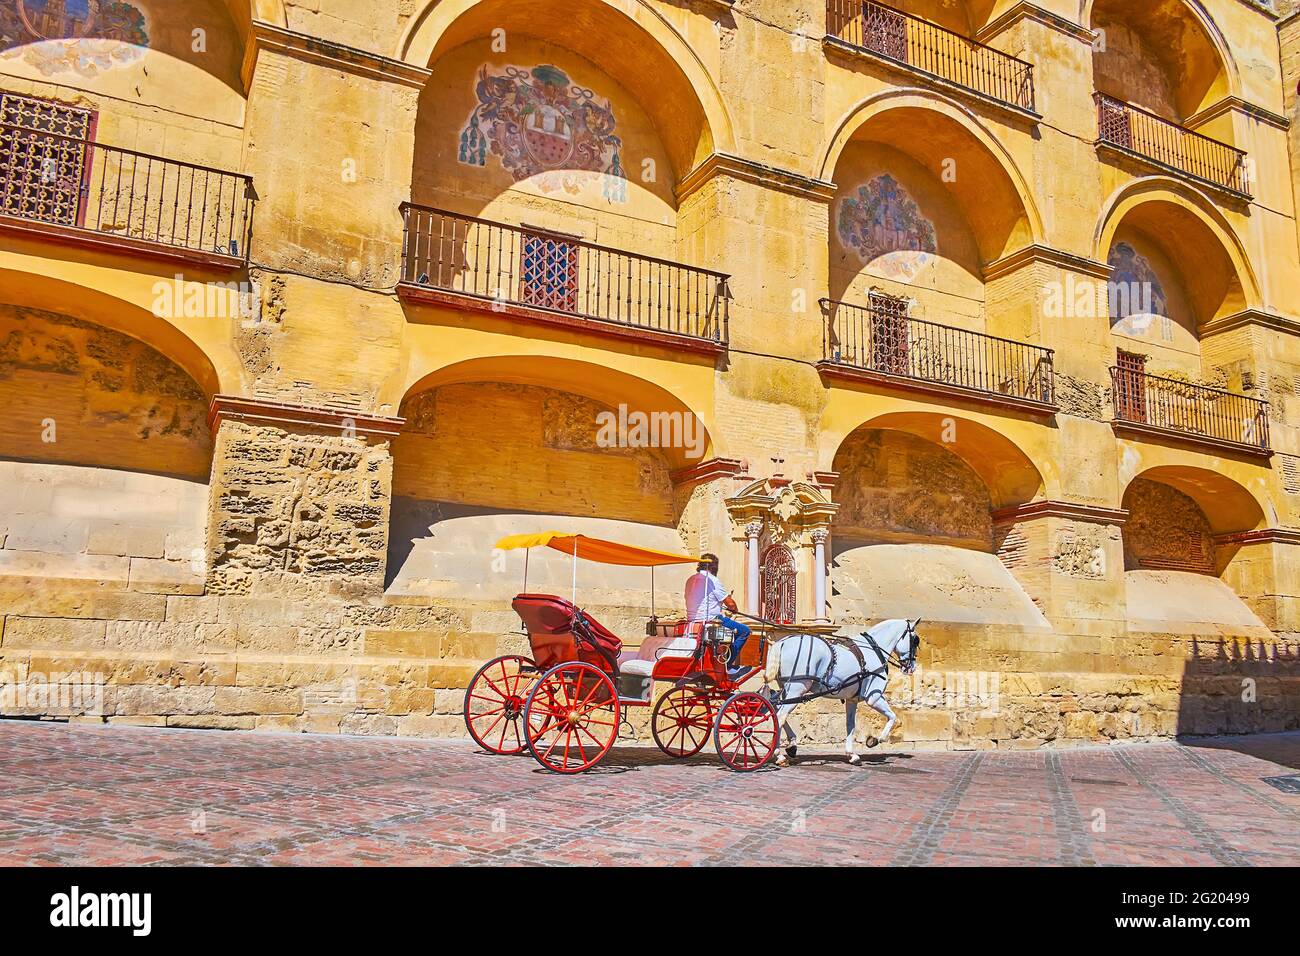 The vintage horse drawn carriage rides along the medieval wall of Mezquita-Catedral, decorated with niches and emblems, Cordoba, Spain Stock Photo